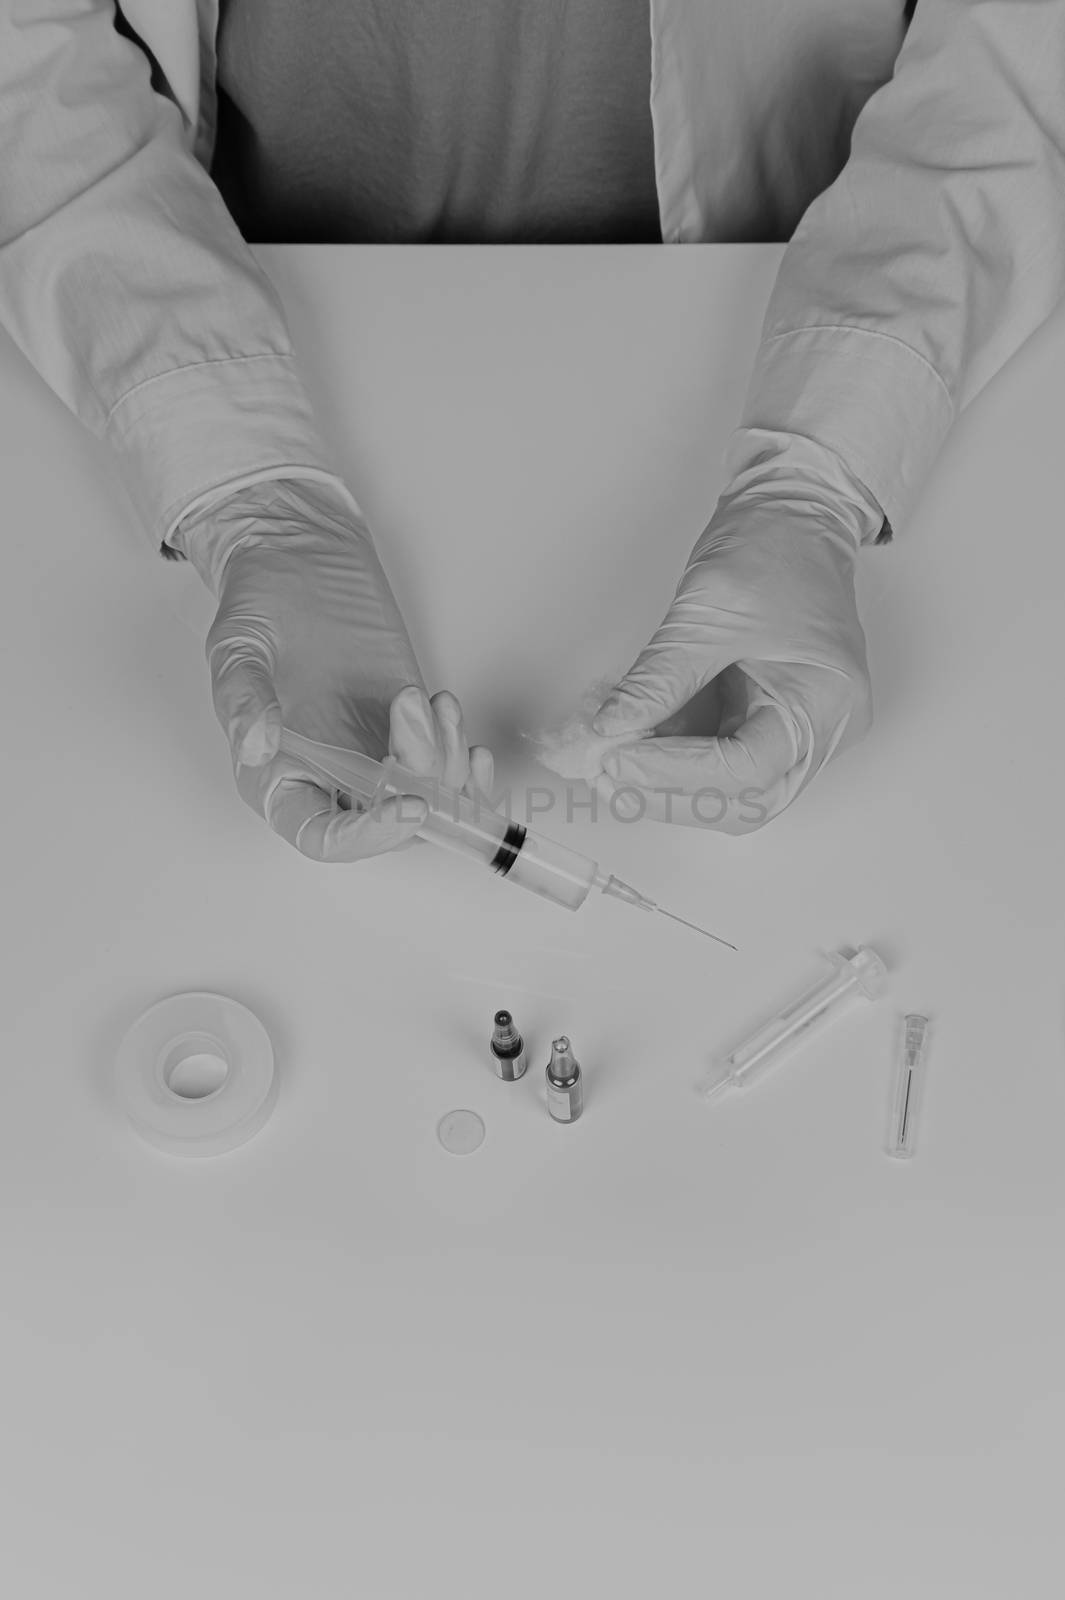 MD preparing injection, faded monochrome style. Top view of medical doctor hands in gloves and lab coat holding syringe on white table with medical accessories